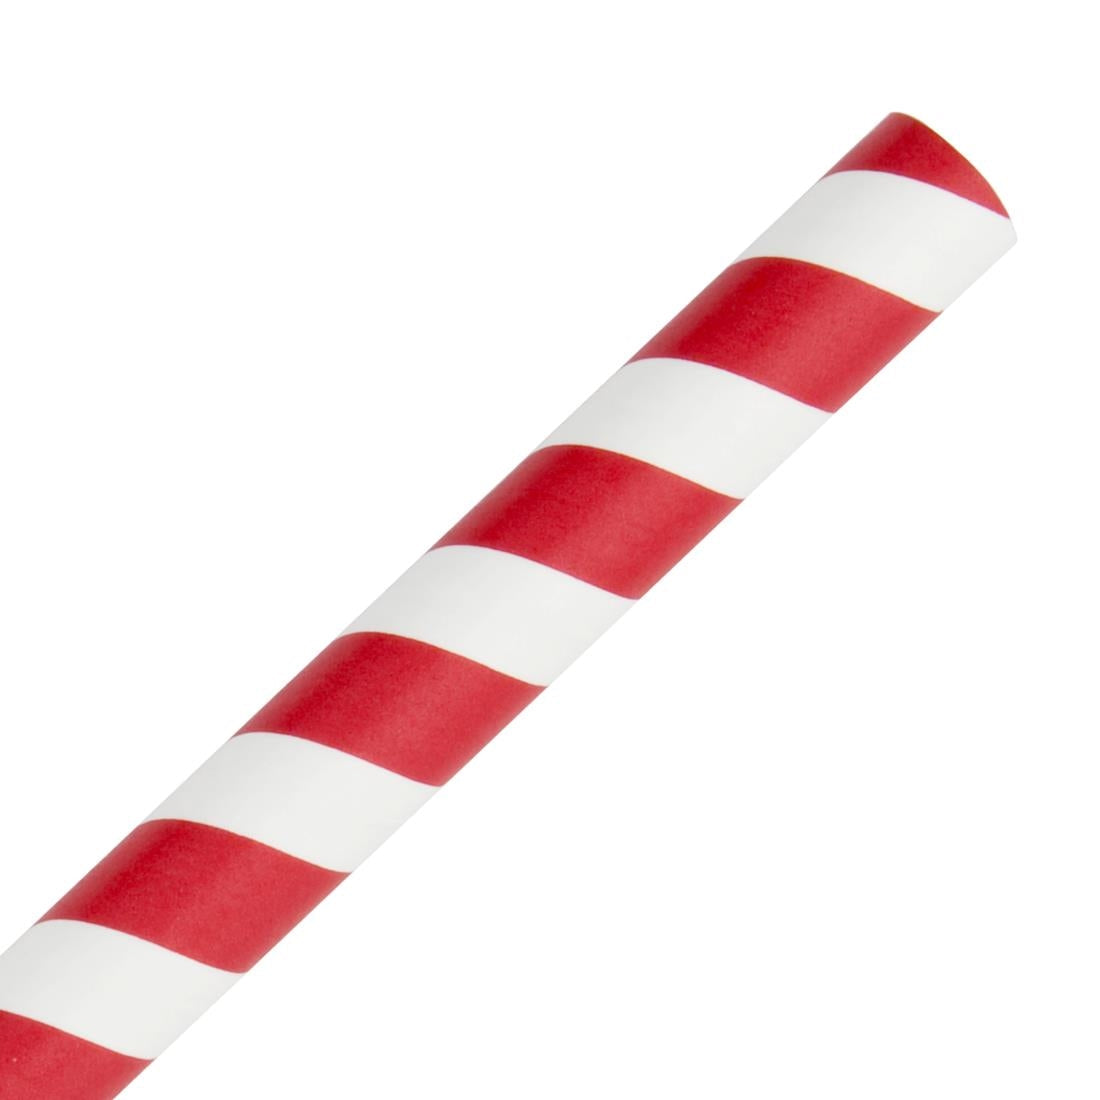 FB147 Fiesta Compostable Paper Smoothie Straws Red Stripes (Pack of 250) JD Catering Equipment Solutions Ltd